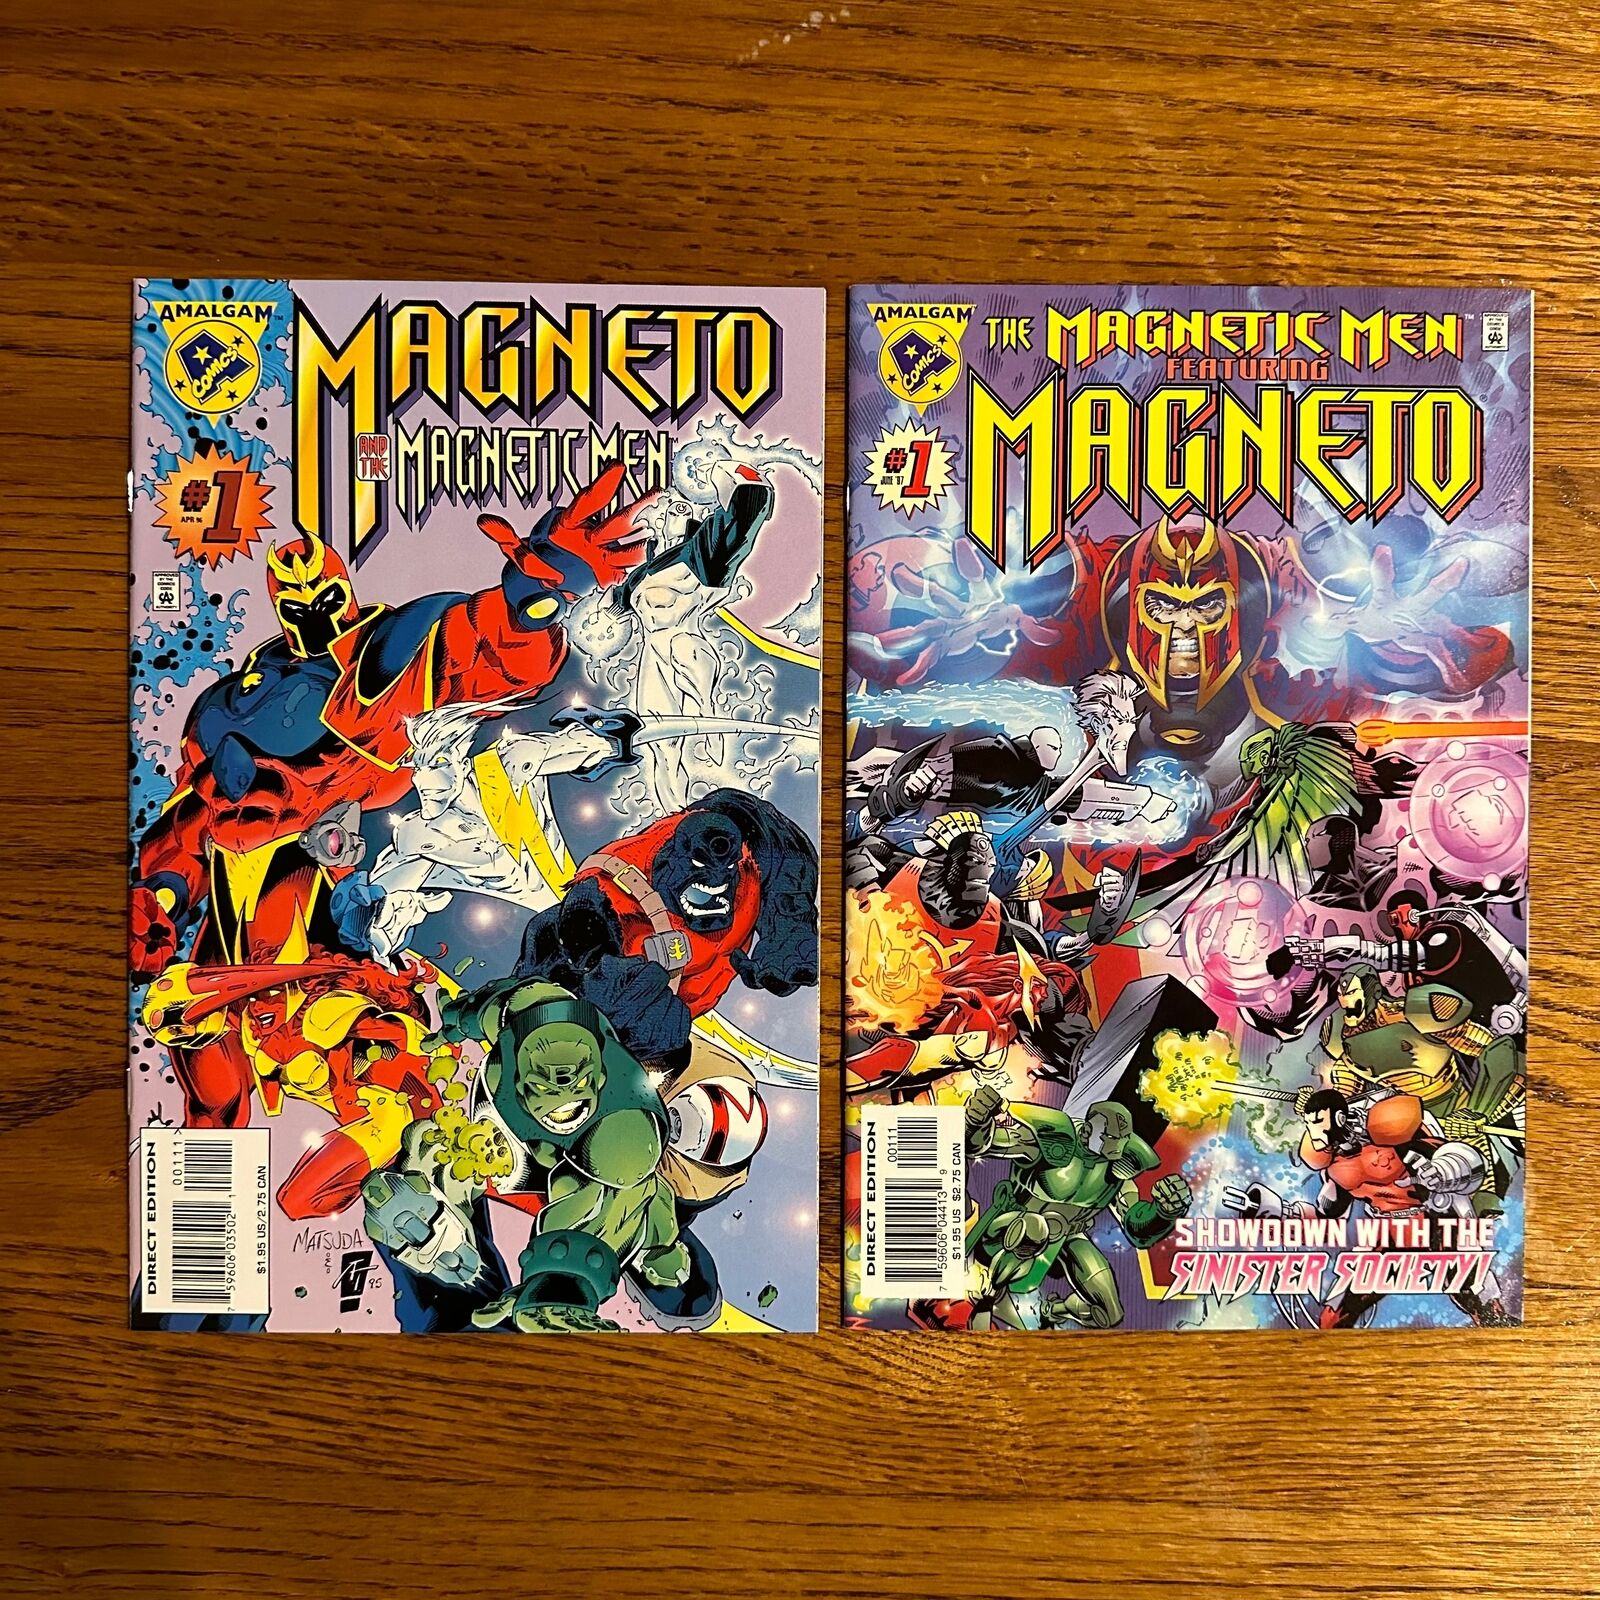 Amalgam: Magneto and the Magnetic Men #1 and The Magnetic Men #1